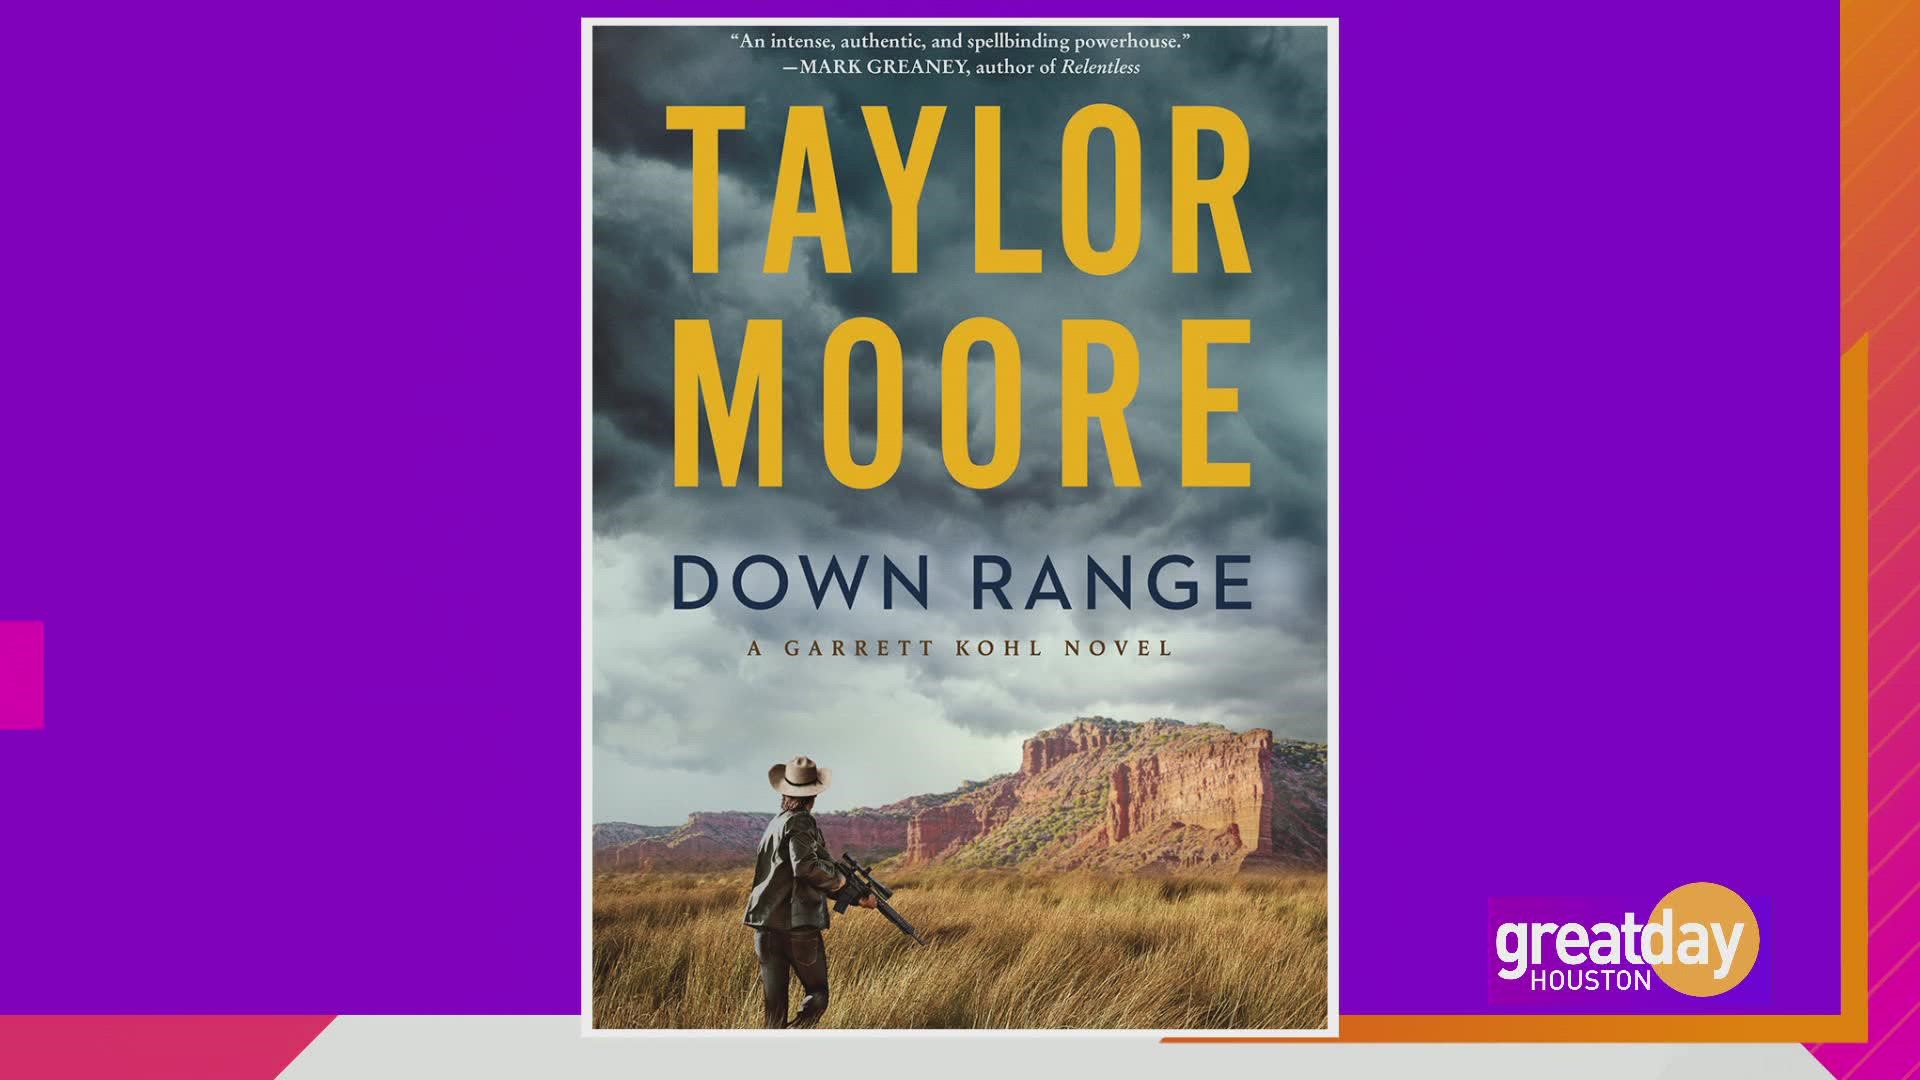 6th Generation Texan, Taylor Moore, speaks about his passion for adventure, career in the CIA and explosive new action novel